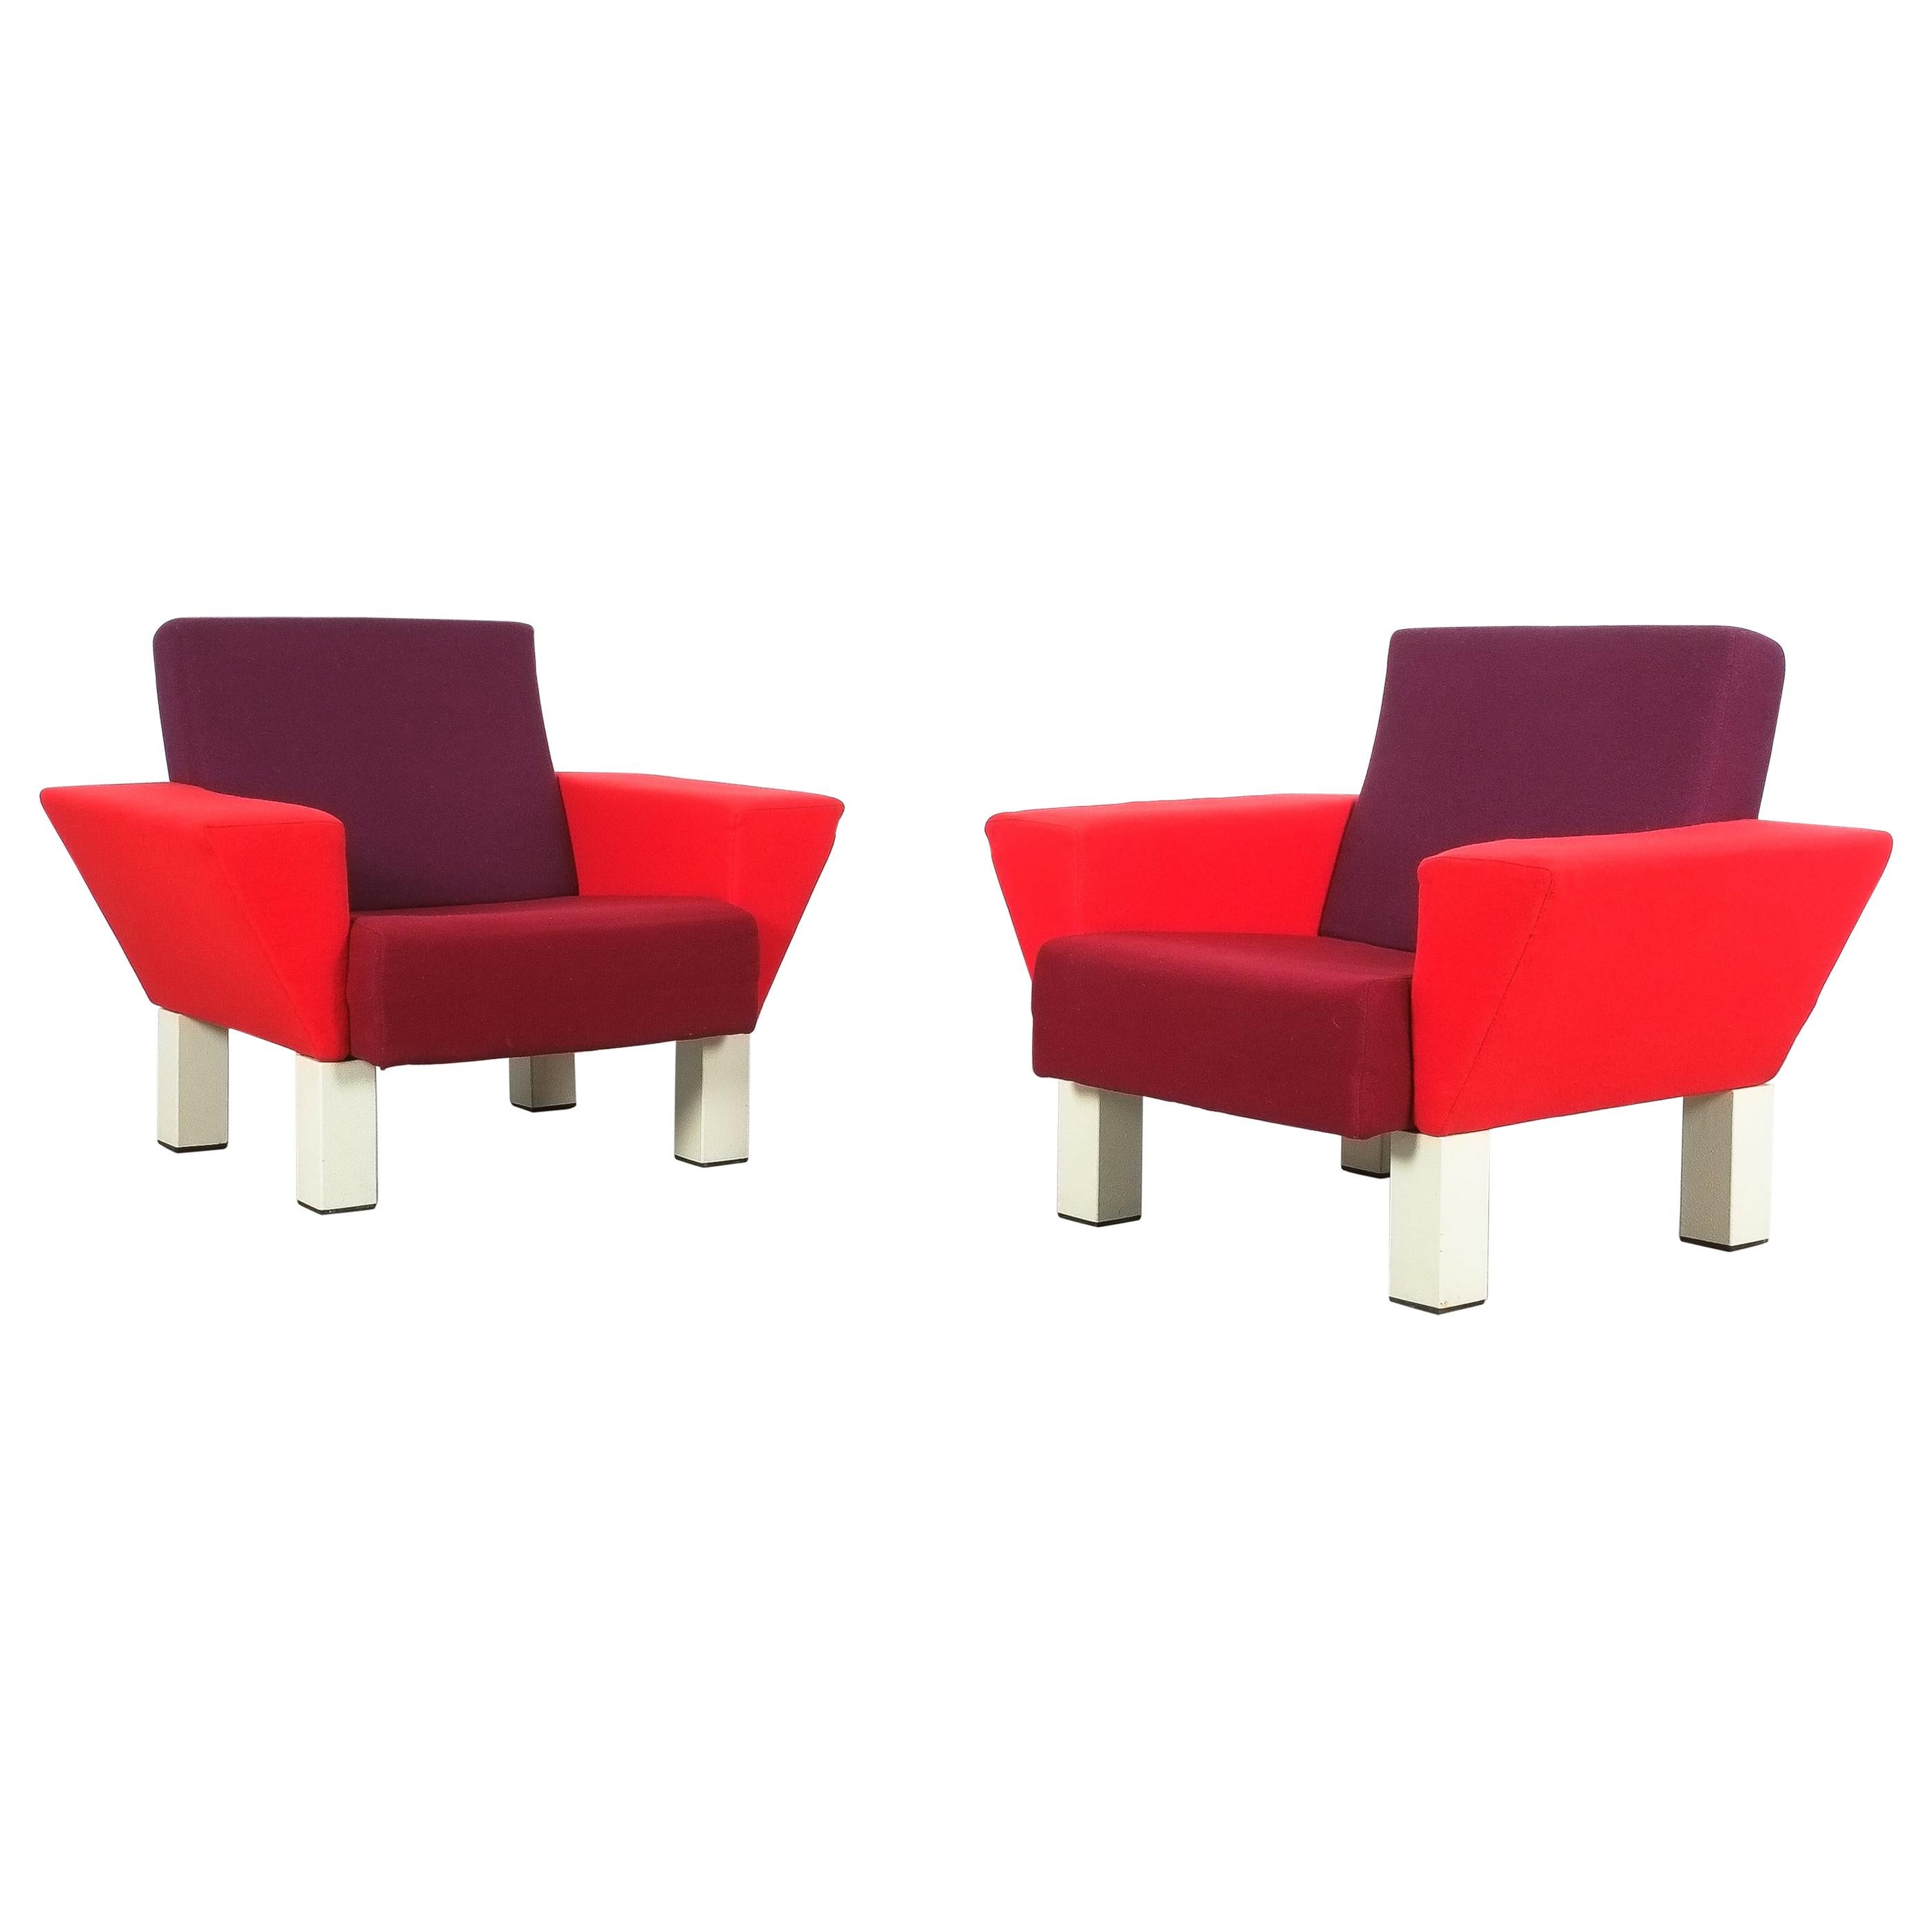 Rare Pair of Westside Armchairs by Ettore Sottsass for Knoll